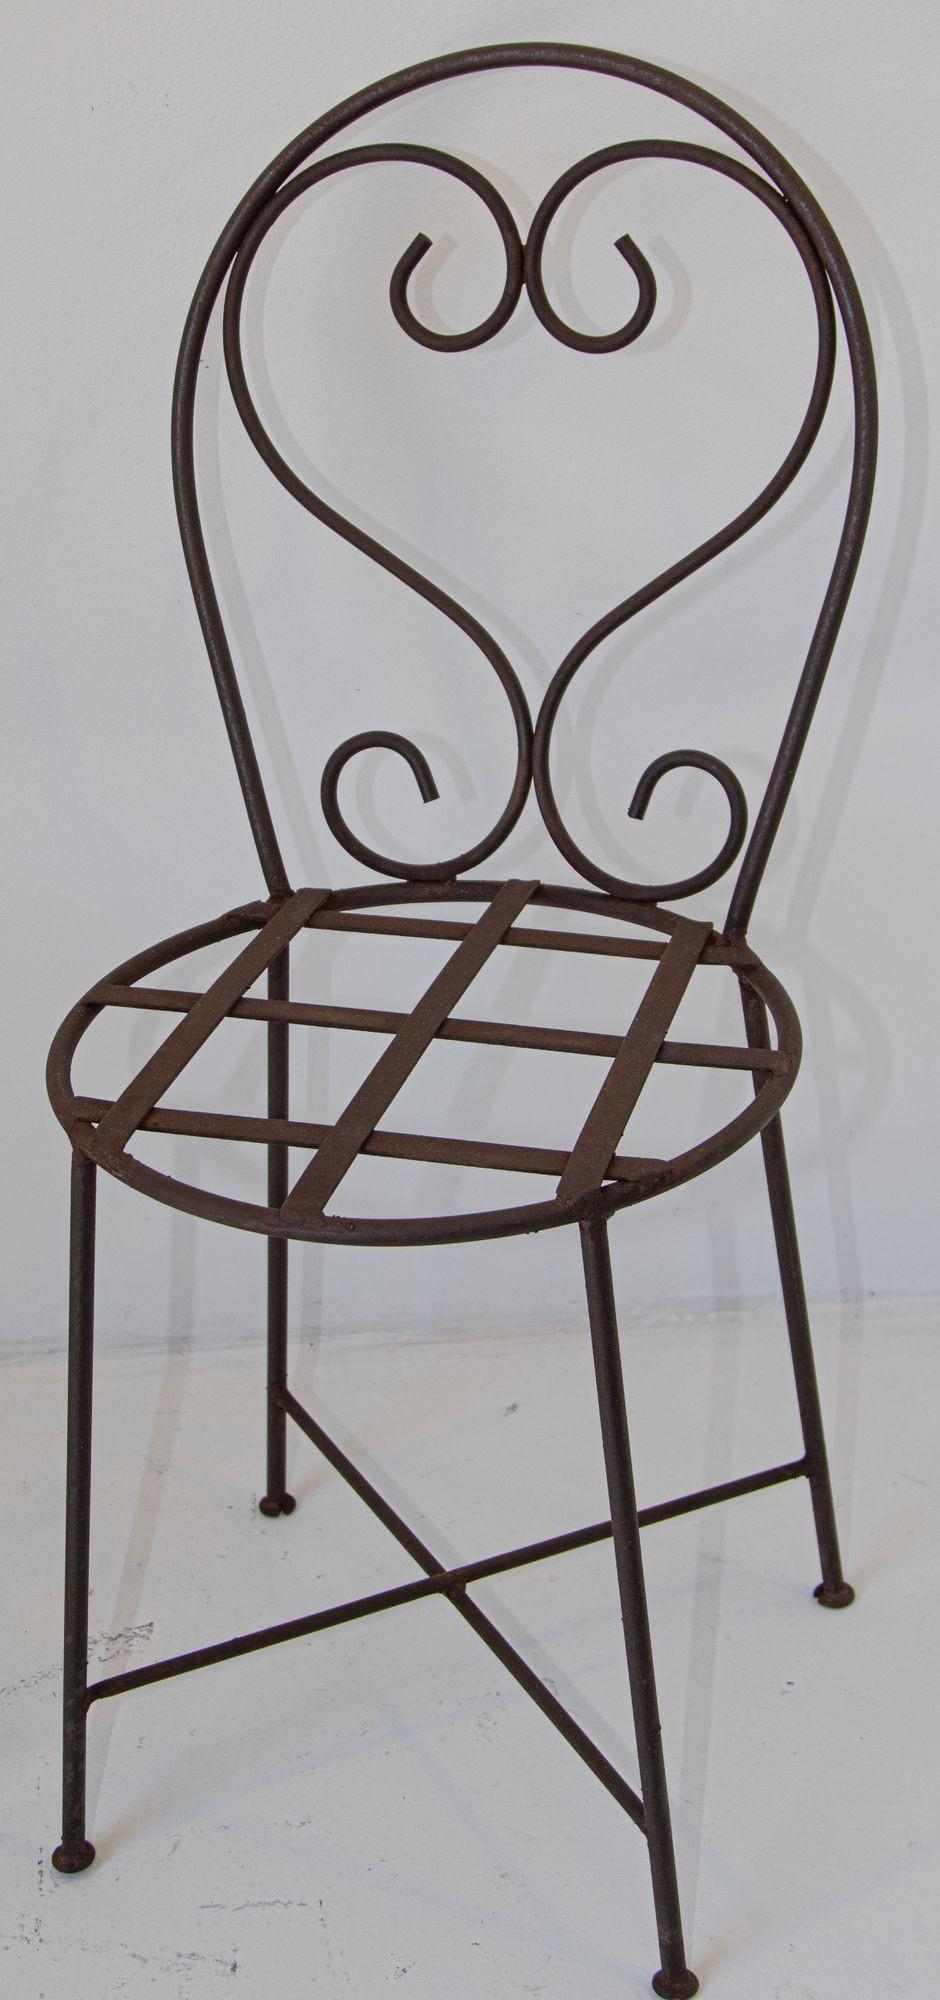 Antique pair of French Iron Forged heart back outdoor garden chairs.
Heart back garden chairs
Dimensions: 
Measures: 36” H
Seat height: 18”
Seat depth: 15.5” x 15.5 Diameter.
Great antique patio, garden outdoor chairs, restored cleaned and